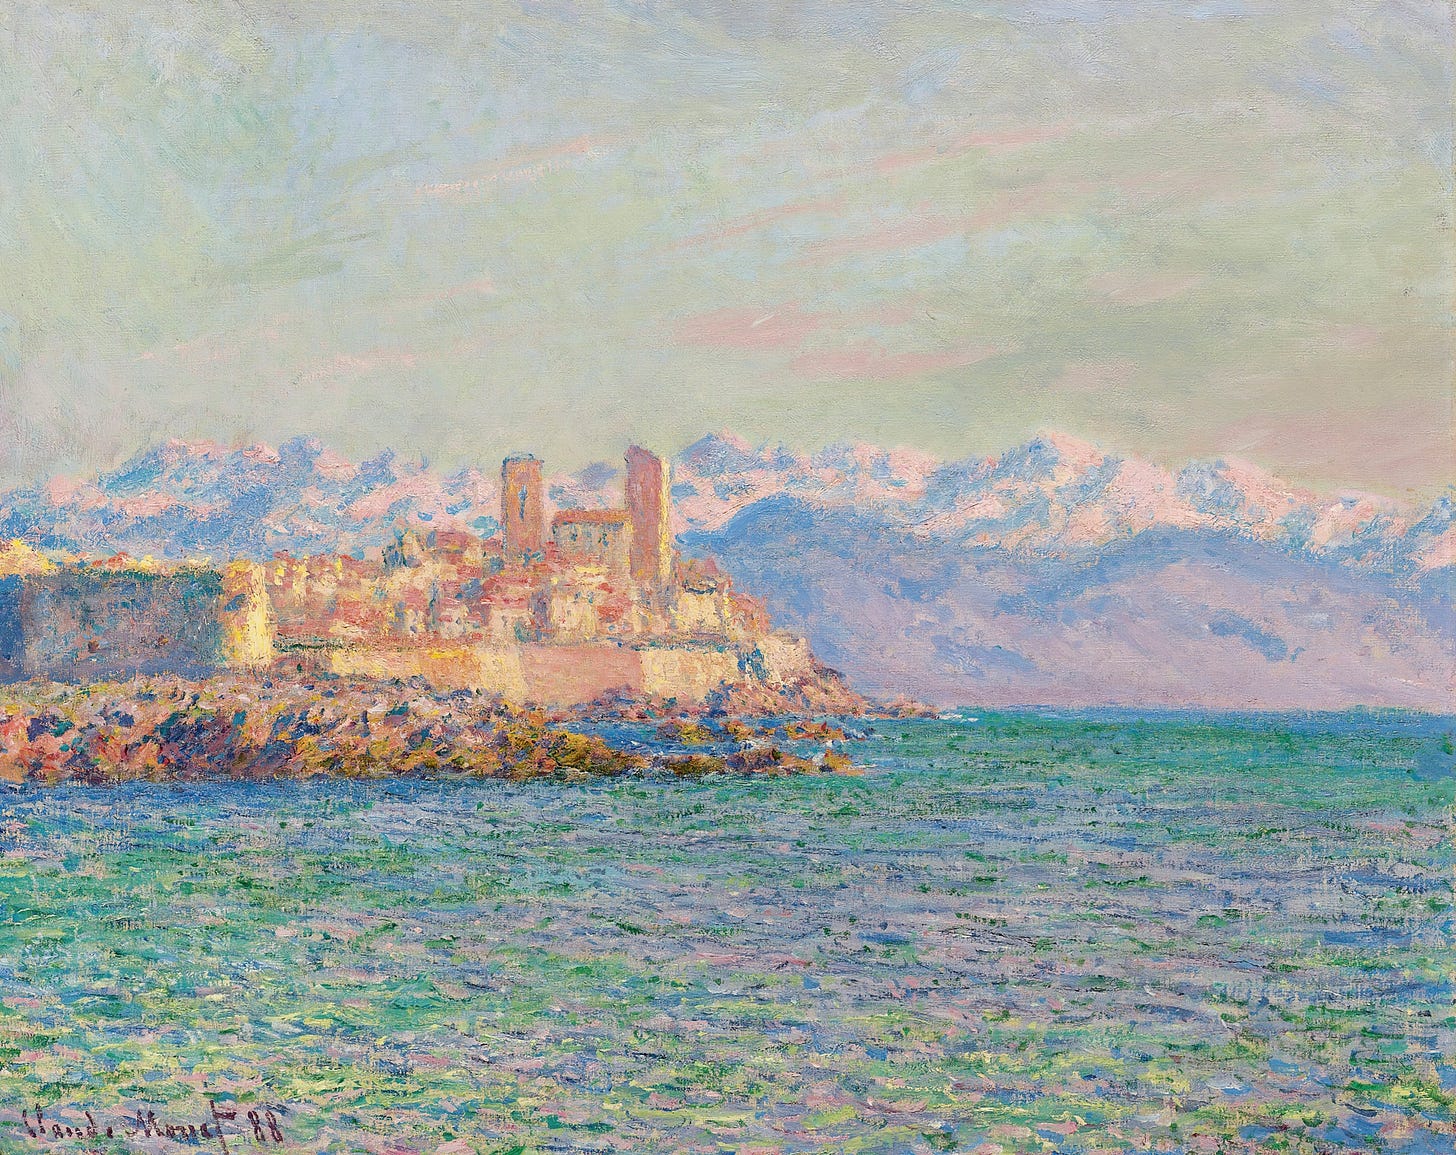 Antibes, Le Fort (1888) by Claude Monet